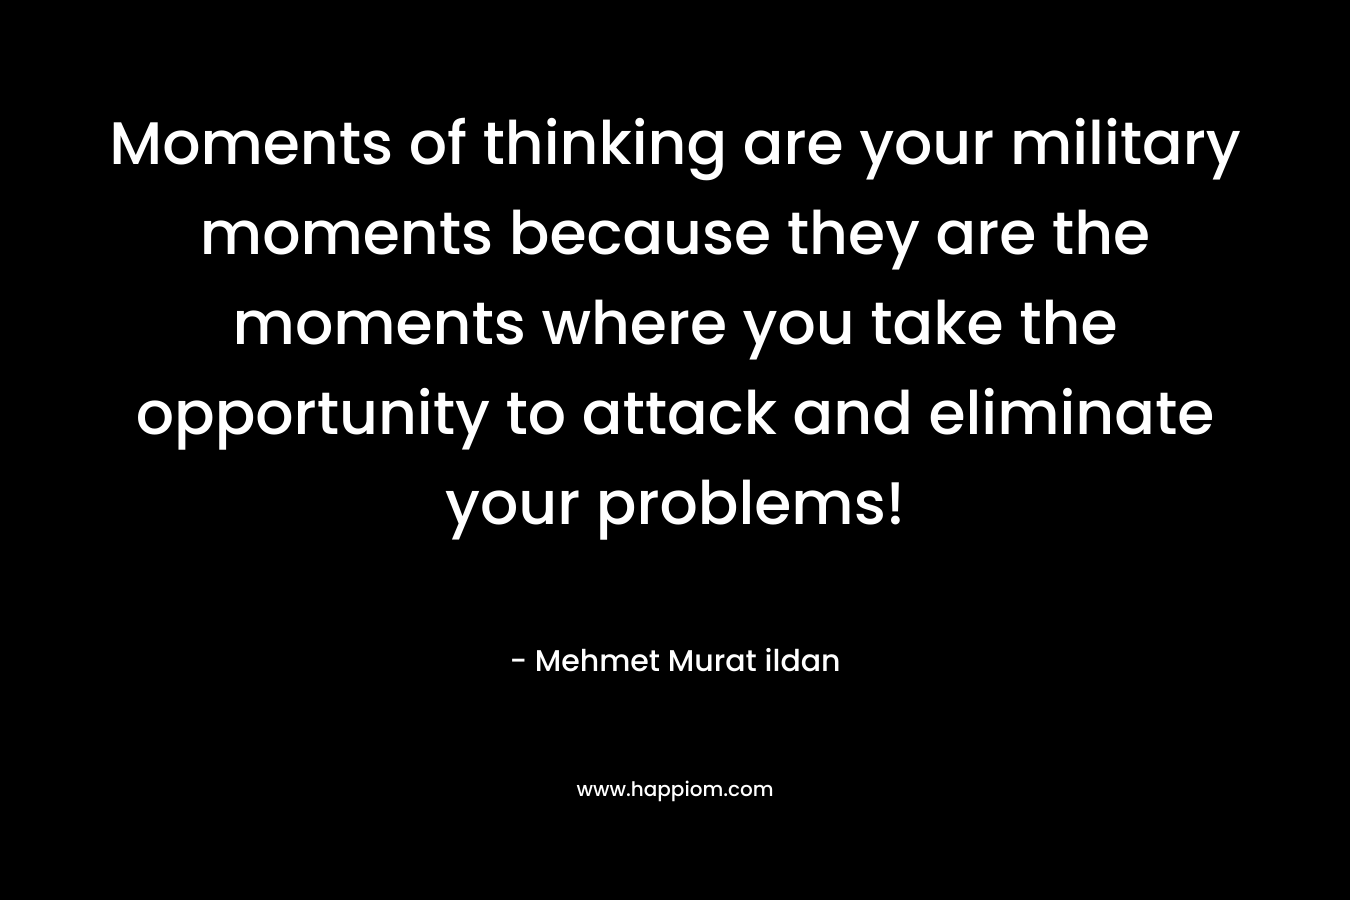 Moments of thinking are your military moments because they are the moments where you take the opportunity to attack and eliminate your problems! – Mehmet Murat ildan